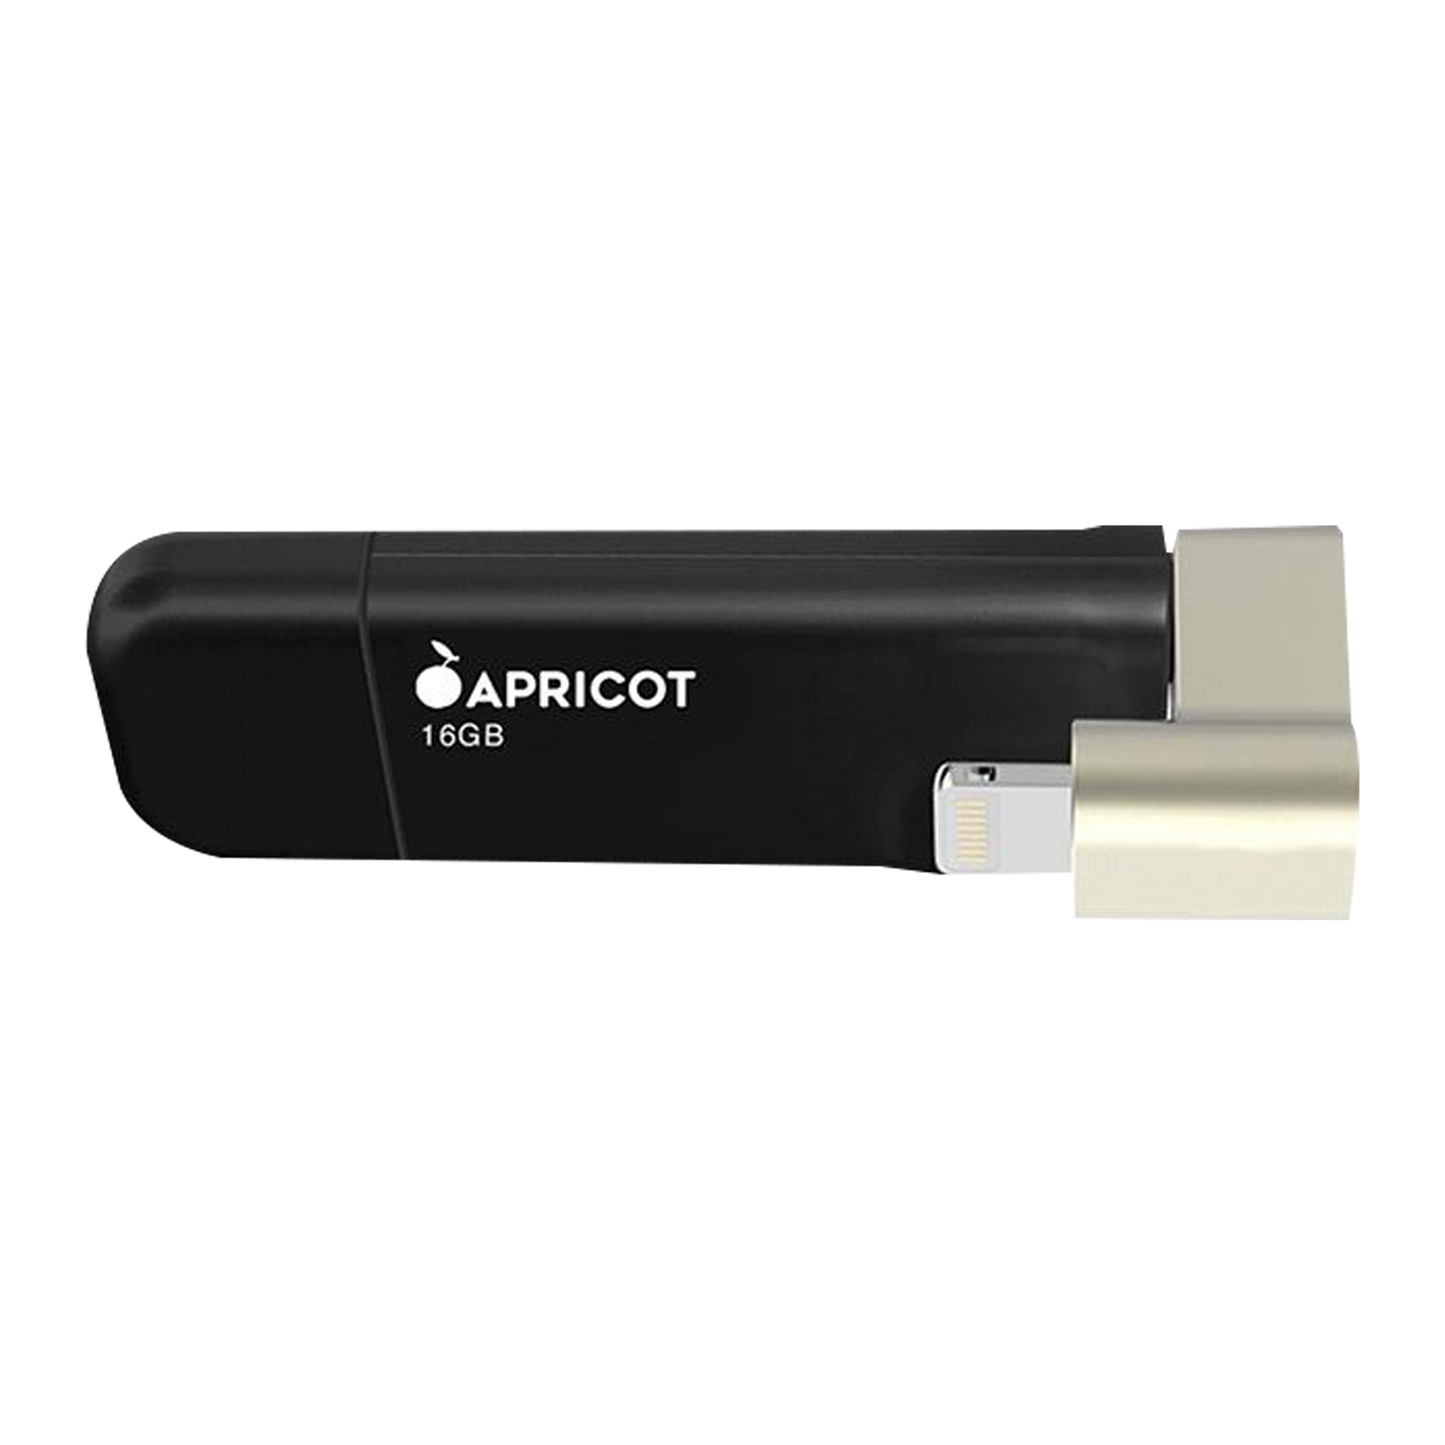 Apricot Pro Series OTG/Flashdrive for Apple Devices